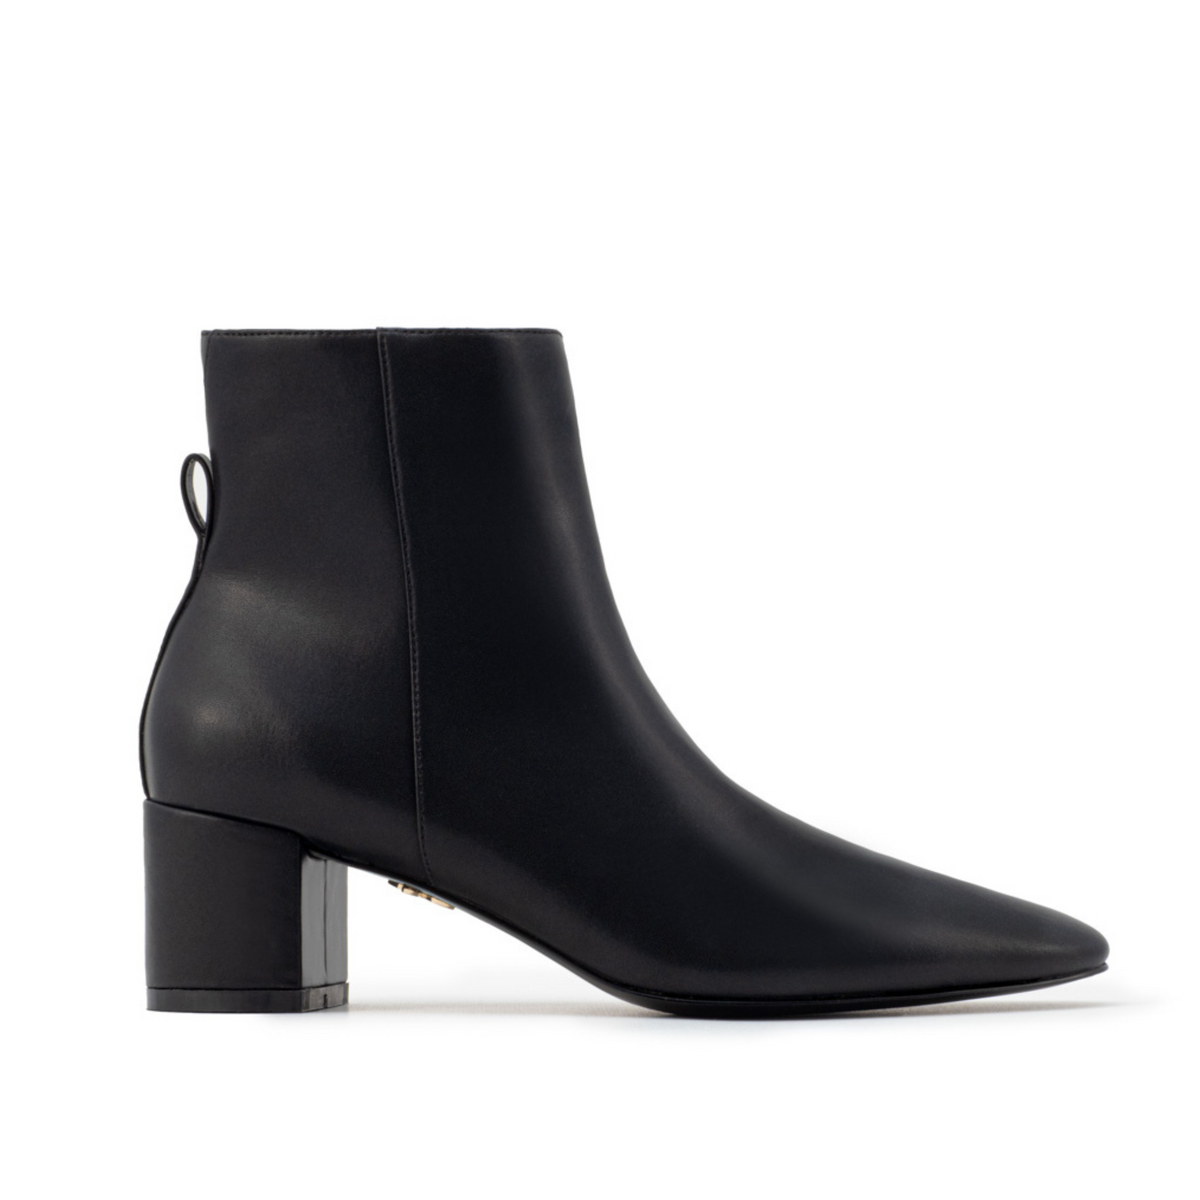 HEDY Midnight Black - Vegan Leather Ankle Boots - VEERAH